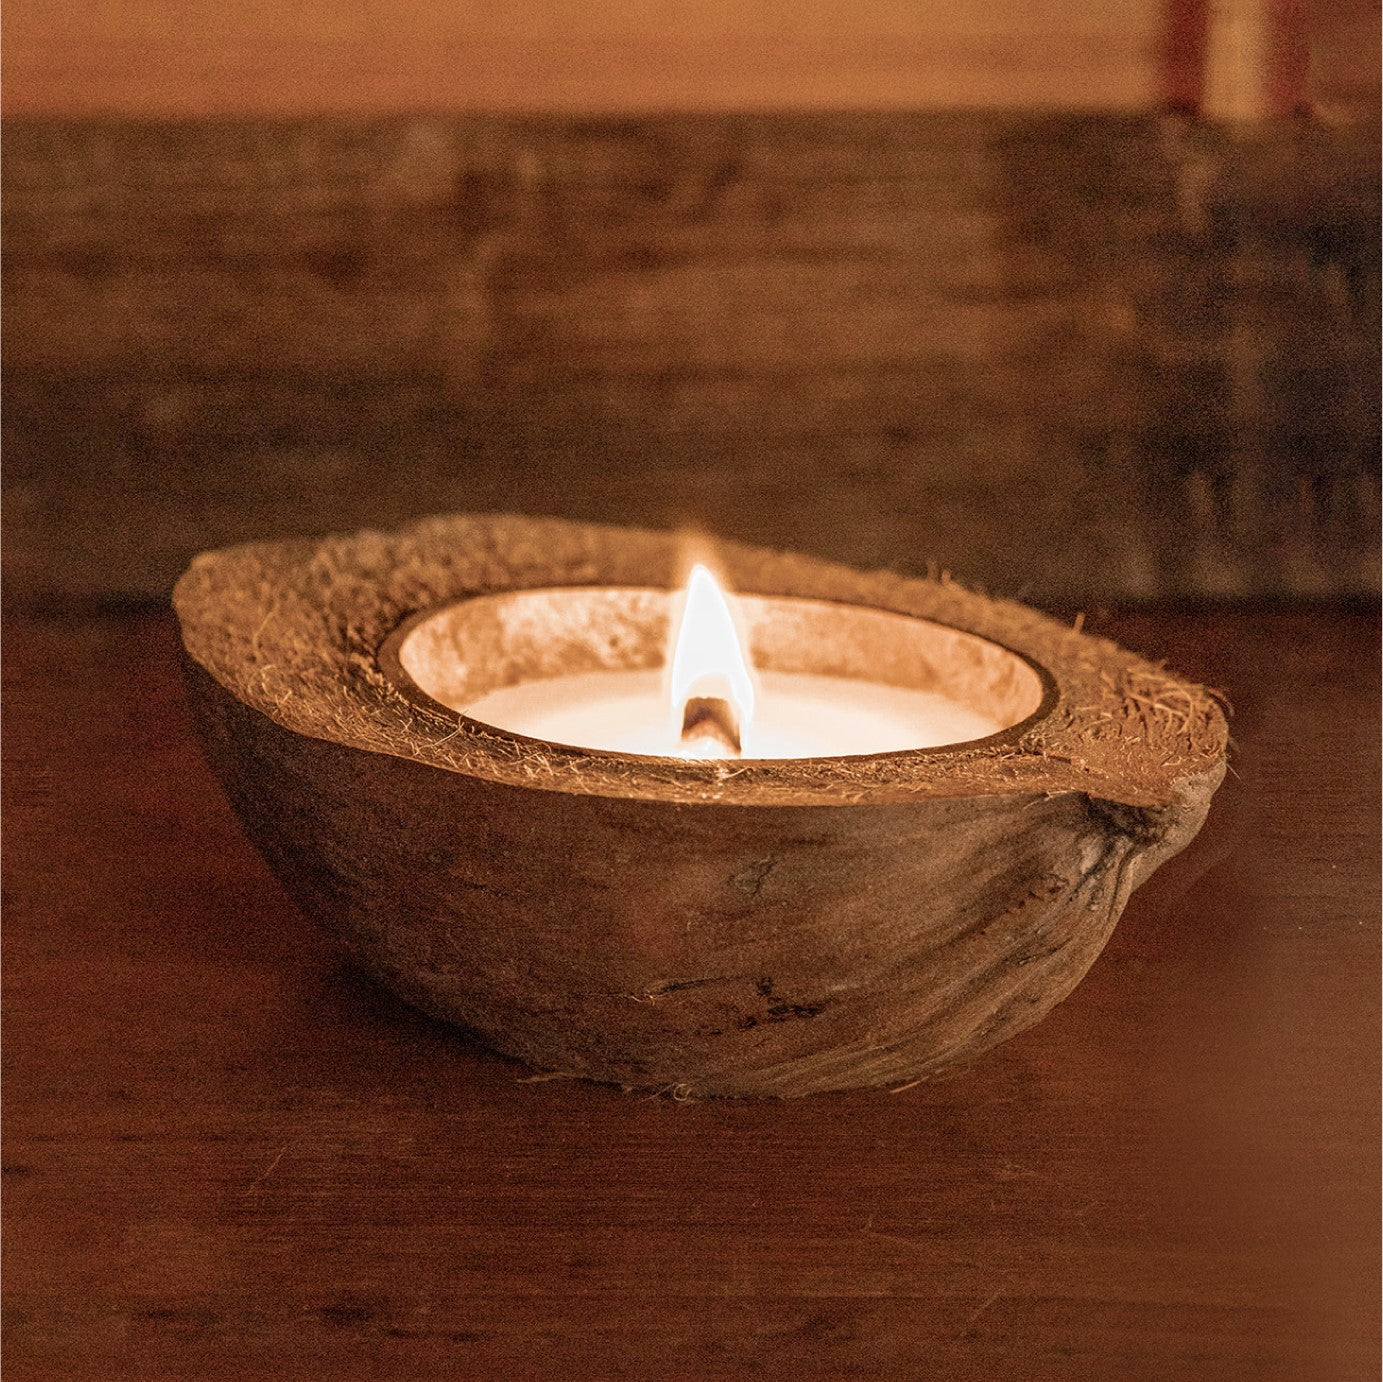 Coconut Candles - BUY 2 GET 1 FREE